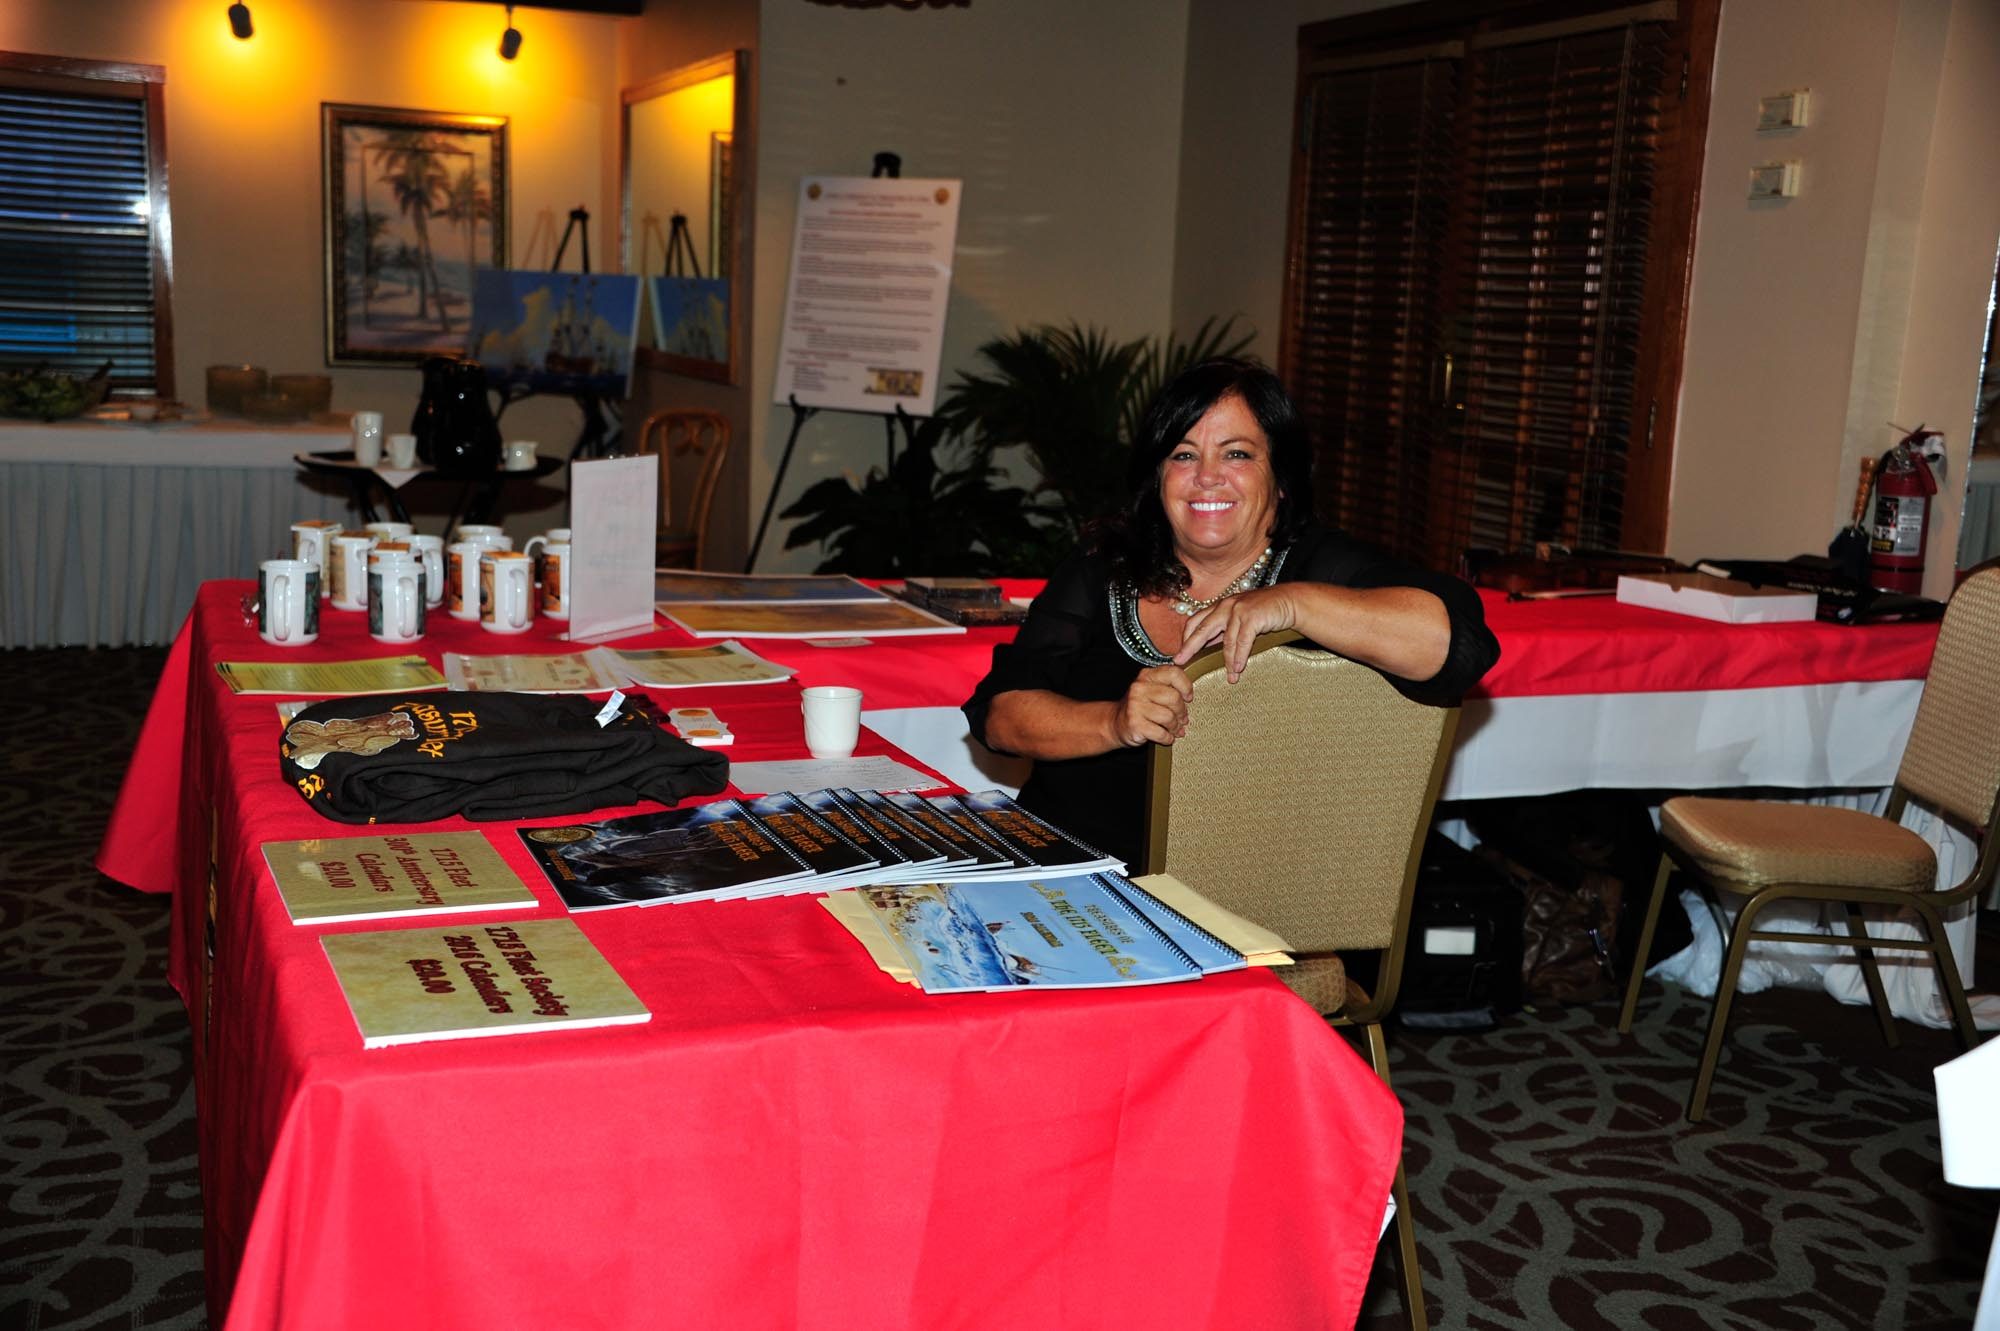 Robin Miller, Ambassador at Captain Hiram's Resort, gets ready to welcome guests to the banquet_